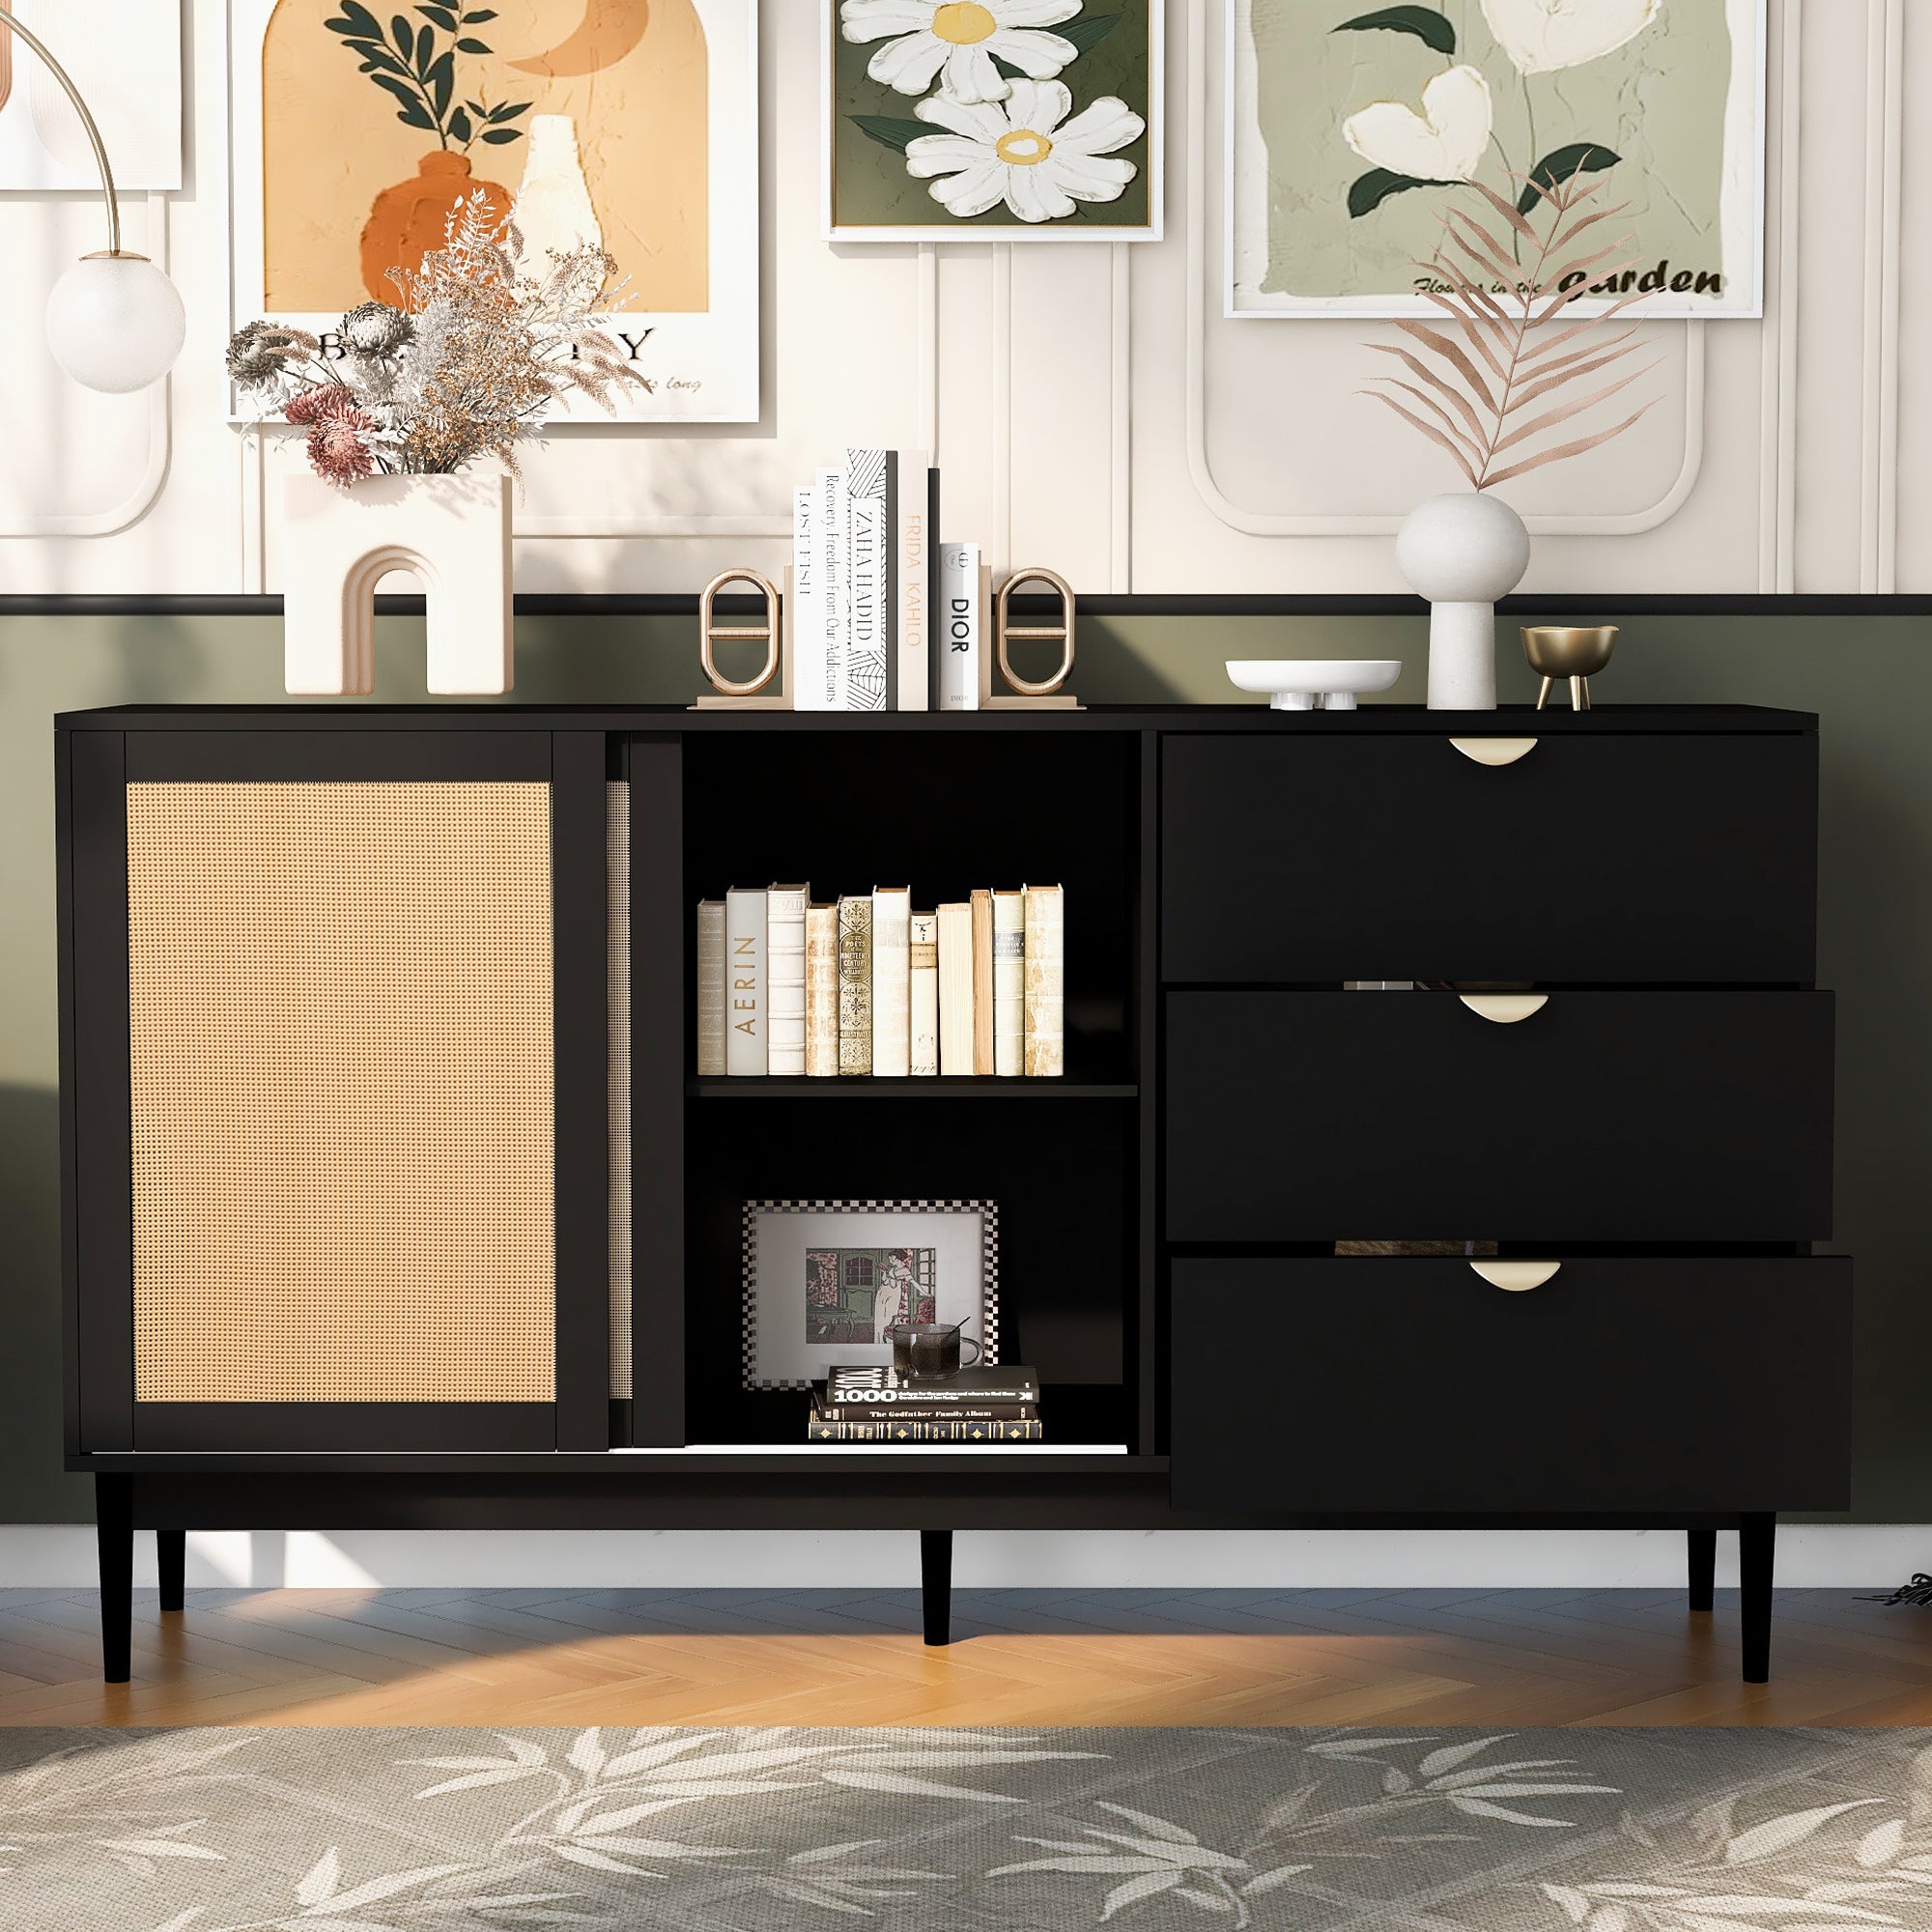 U Style Featured Two door Storage Cabinet with Three